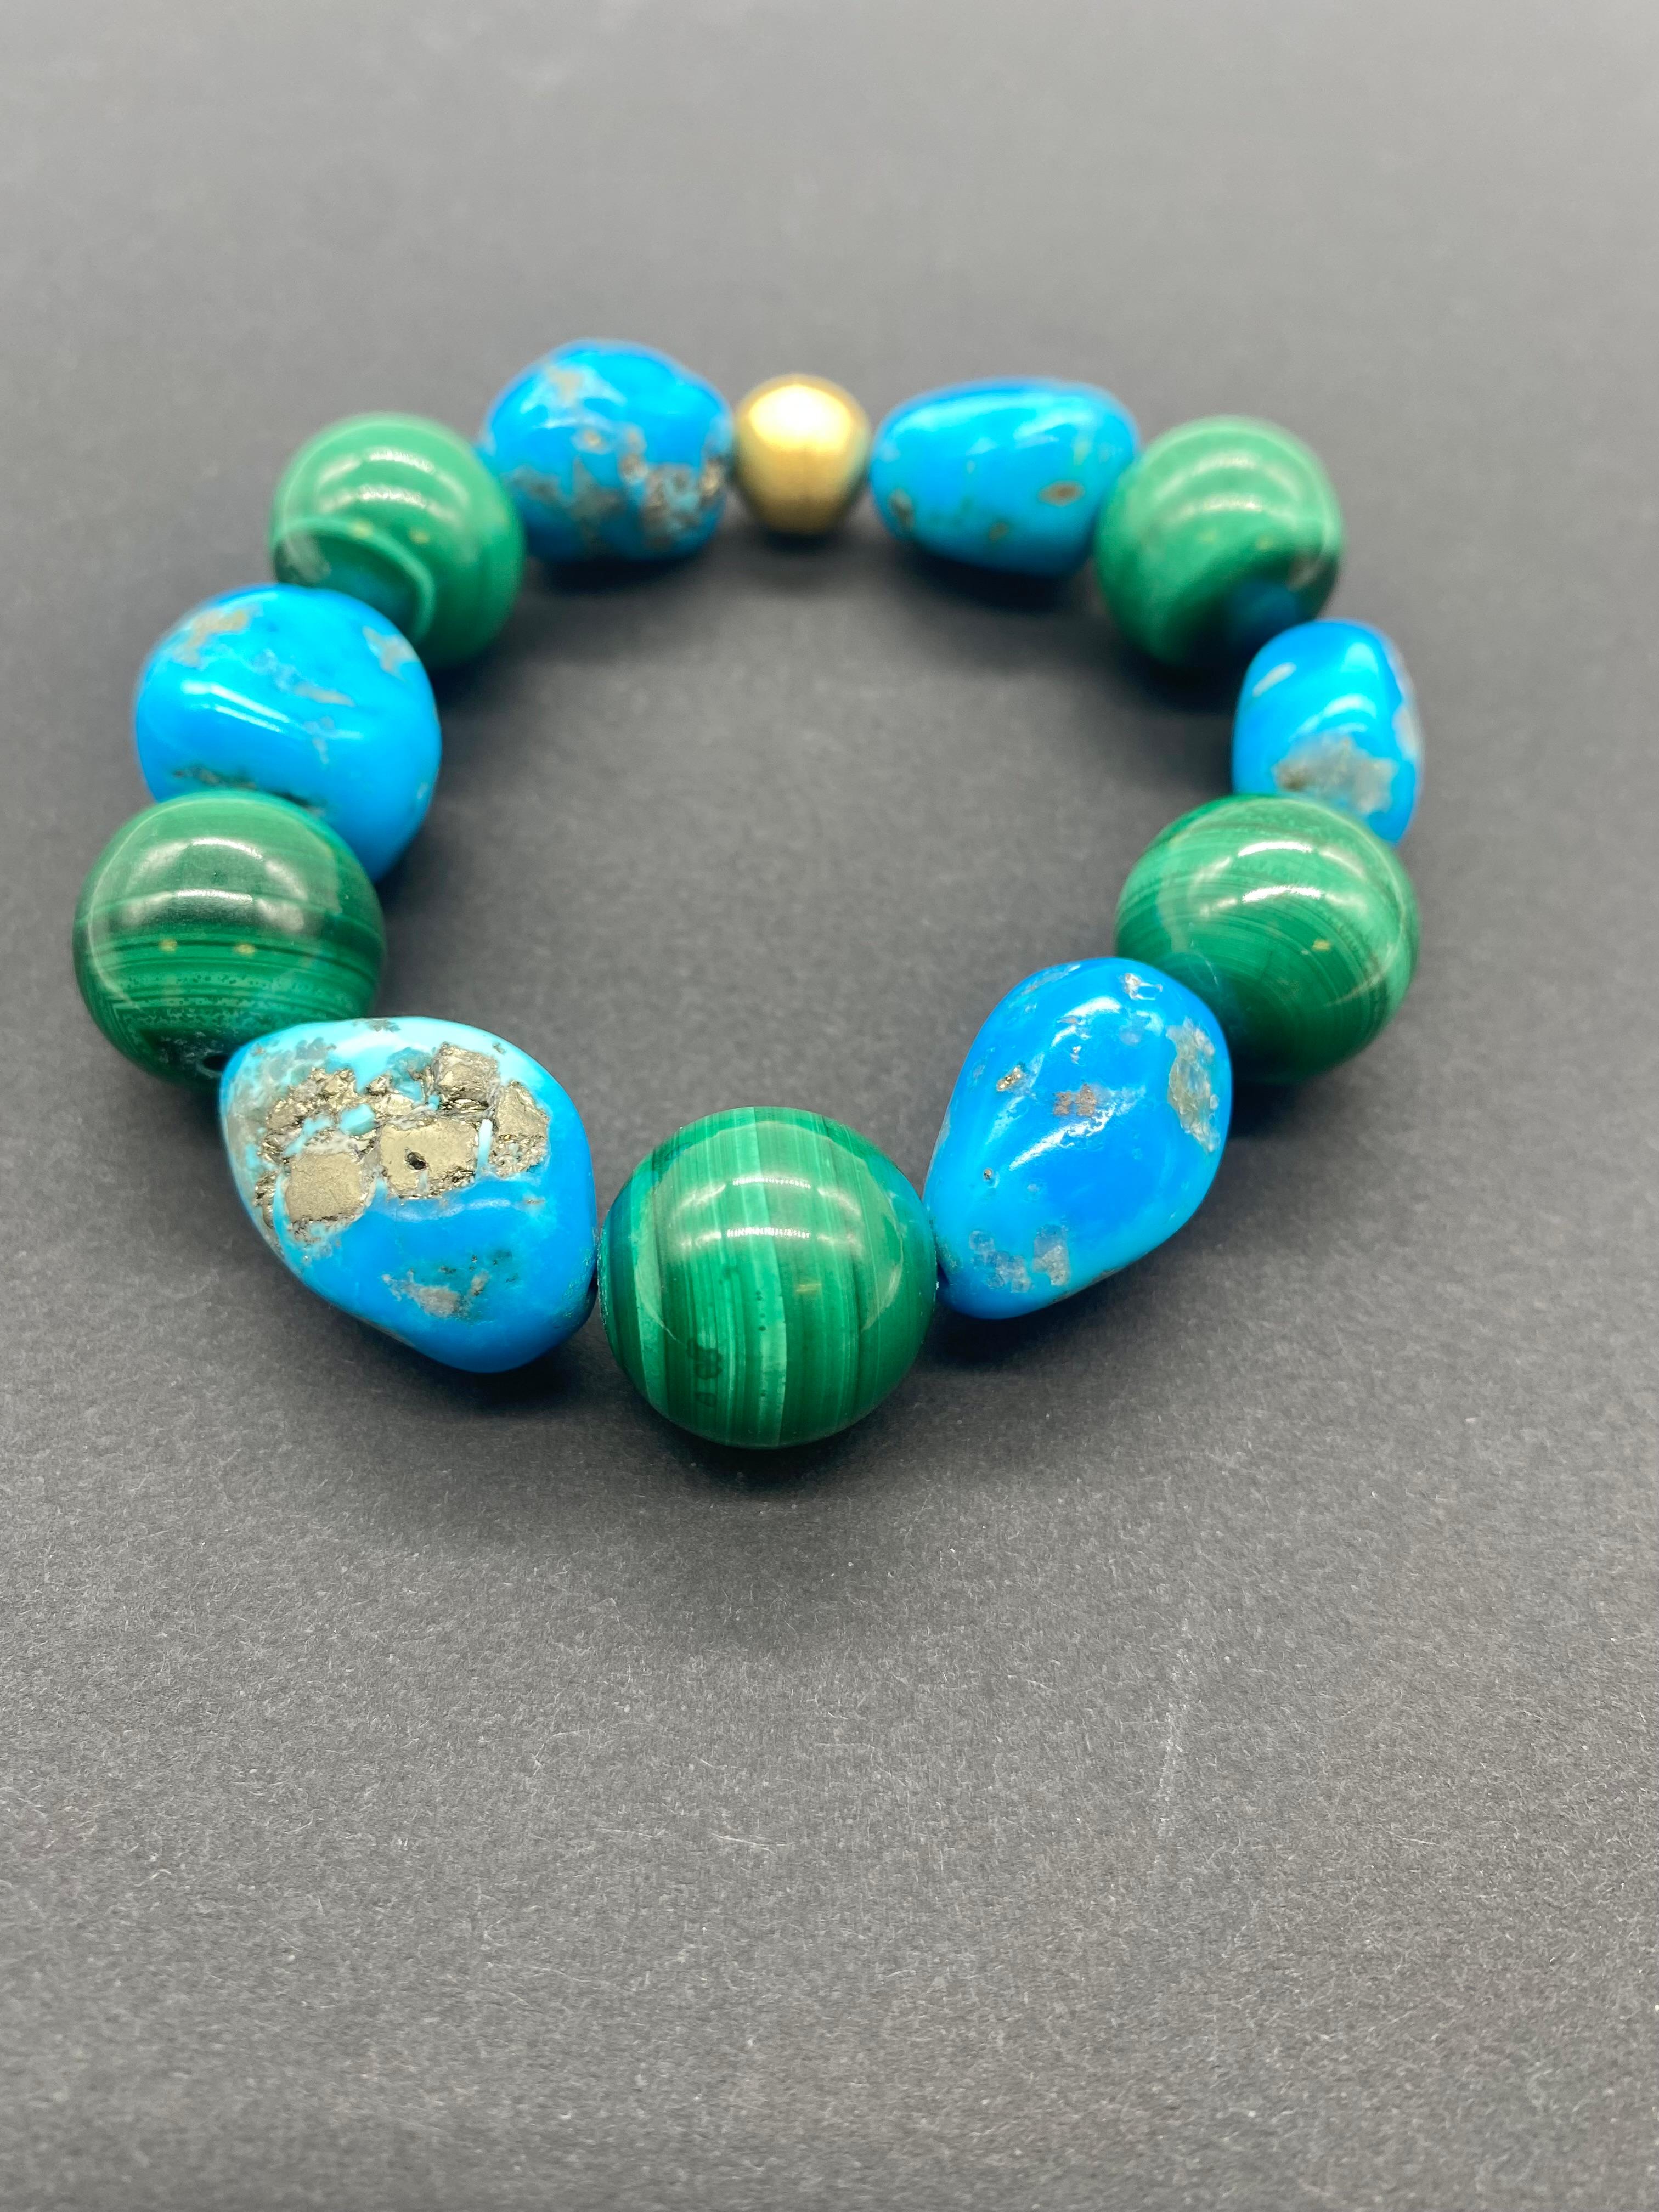 Turquoise Bracelet with Malachite and Yellow Satin Silver.
Magnificent bracelet surrounded by malachite and turquoise, the clasp is in yellow satin silver, this clasp brings out the color of the stones. The length of the bracelet is 20.7 cm. The